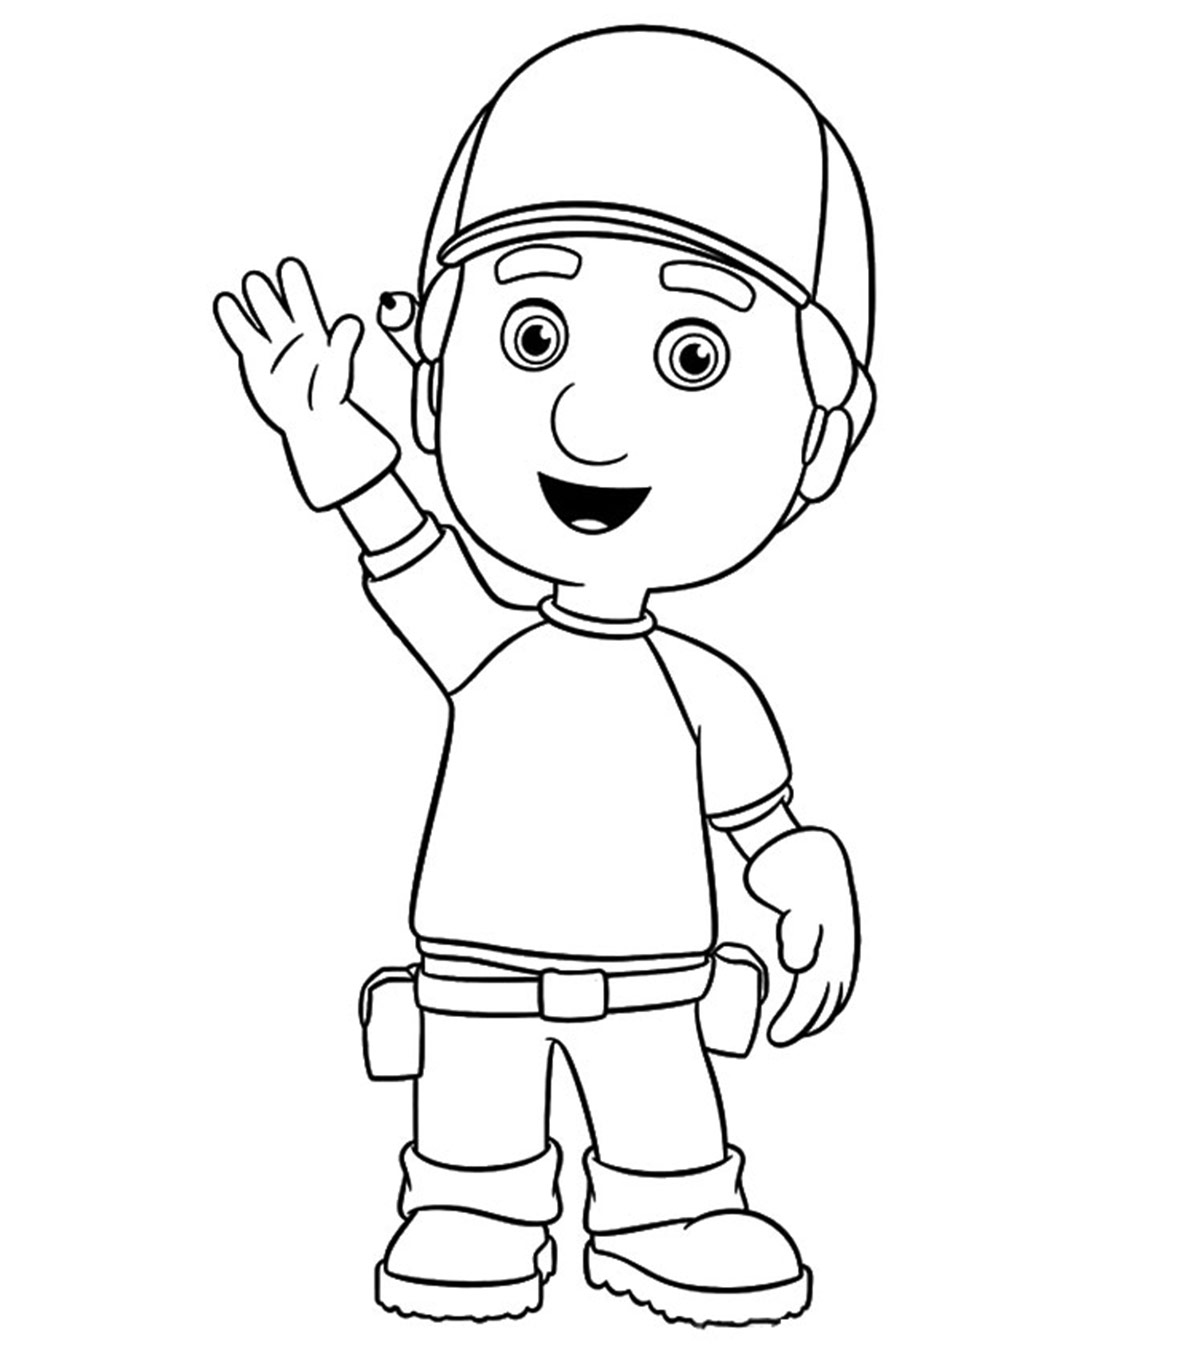 Download Cartoon Coloring Pages - MomJunction